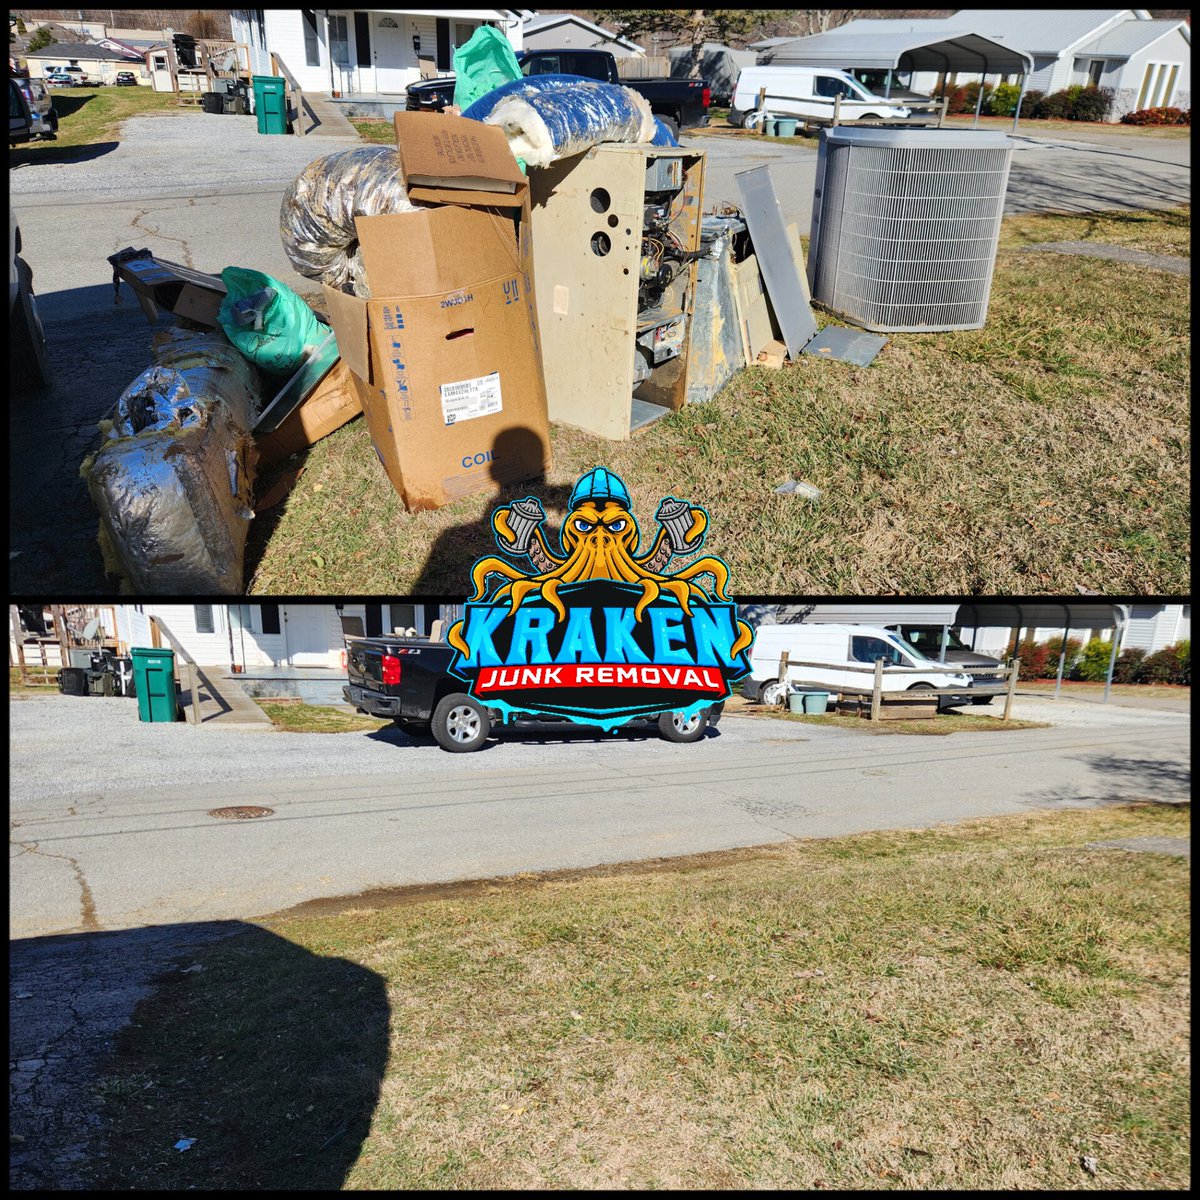 Bulk waste #junkremoval pickup in Erwin, TN for a contractor. We hauled away an AC unit, a furnace and a condenser plus some ventilation debris. 

#junkremovalservice #erwin #erwintn #krakenjunkremoval